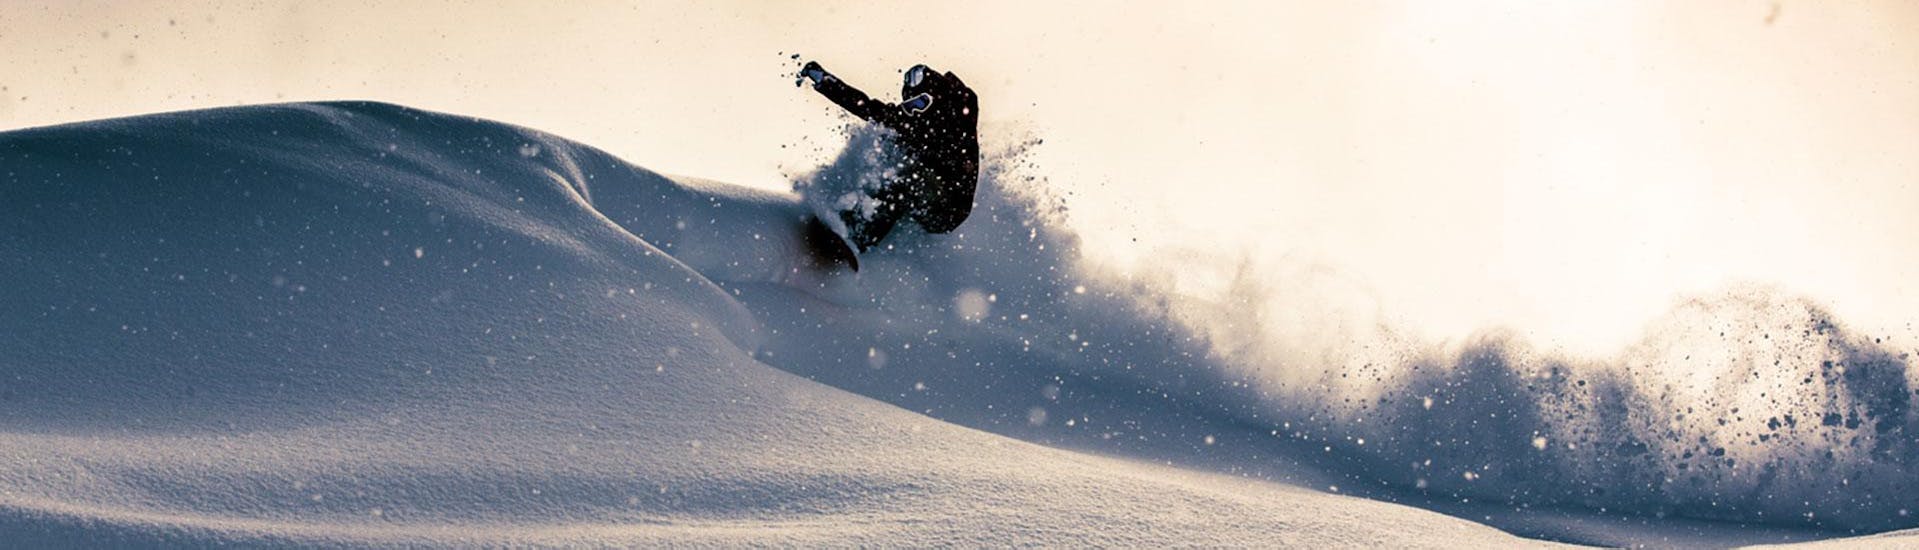 A snowboarder is riding through deep powder snow during his Off-Piste Snowboarding Lessons "Package" - All Levels with BOARD.AT.